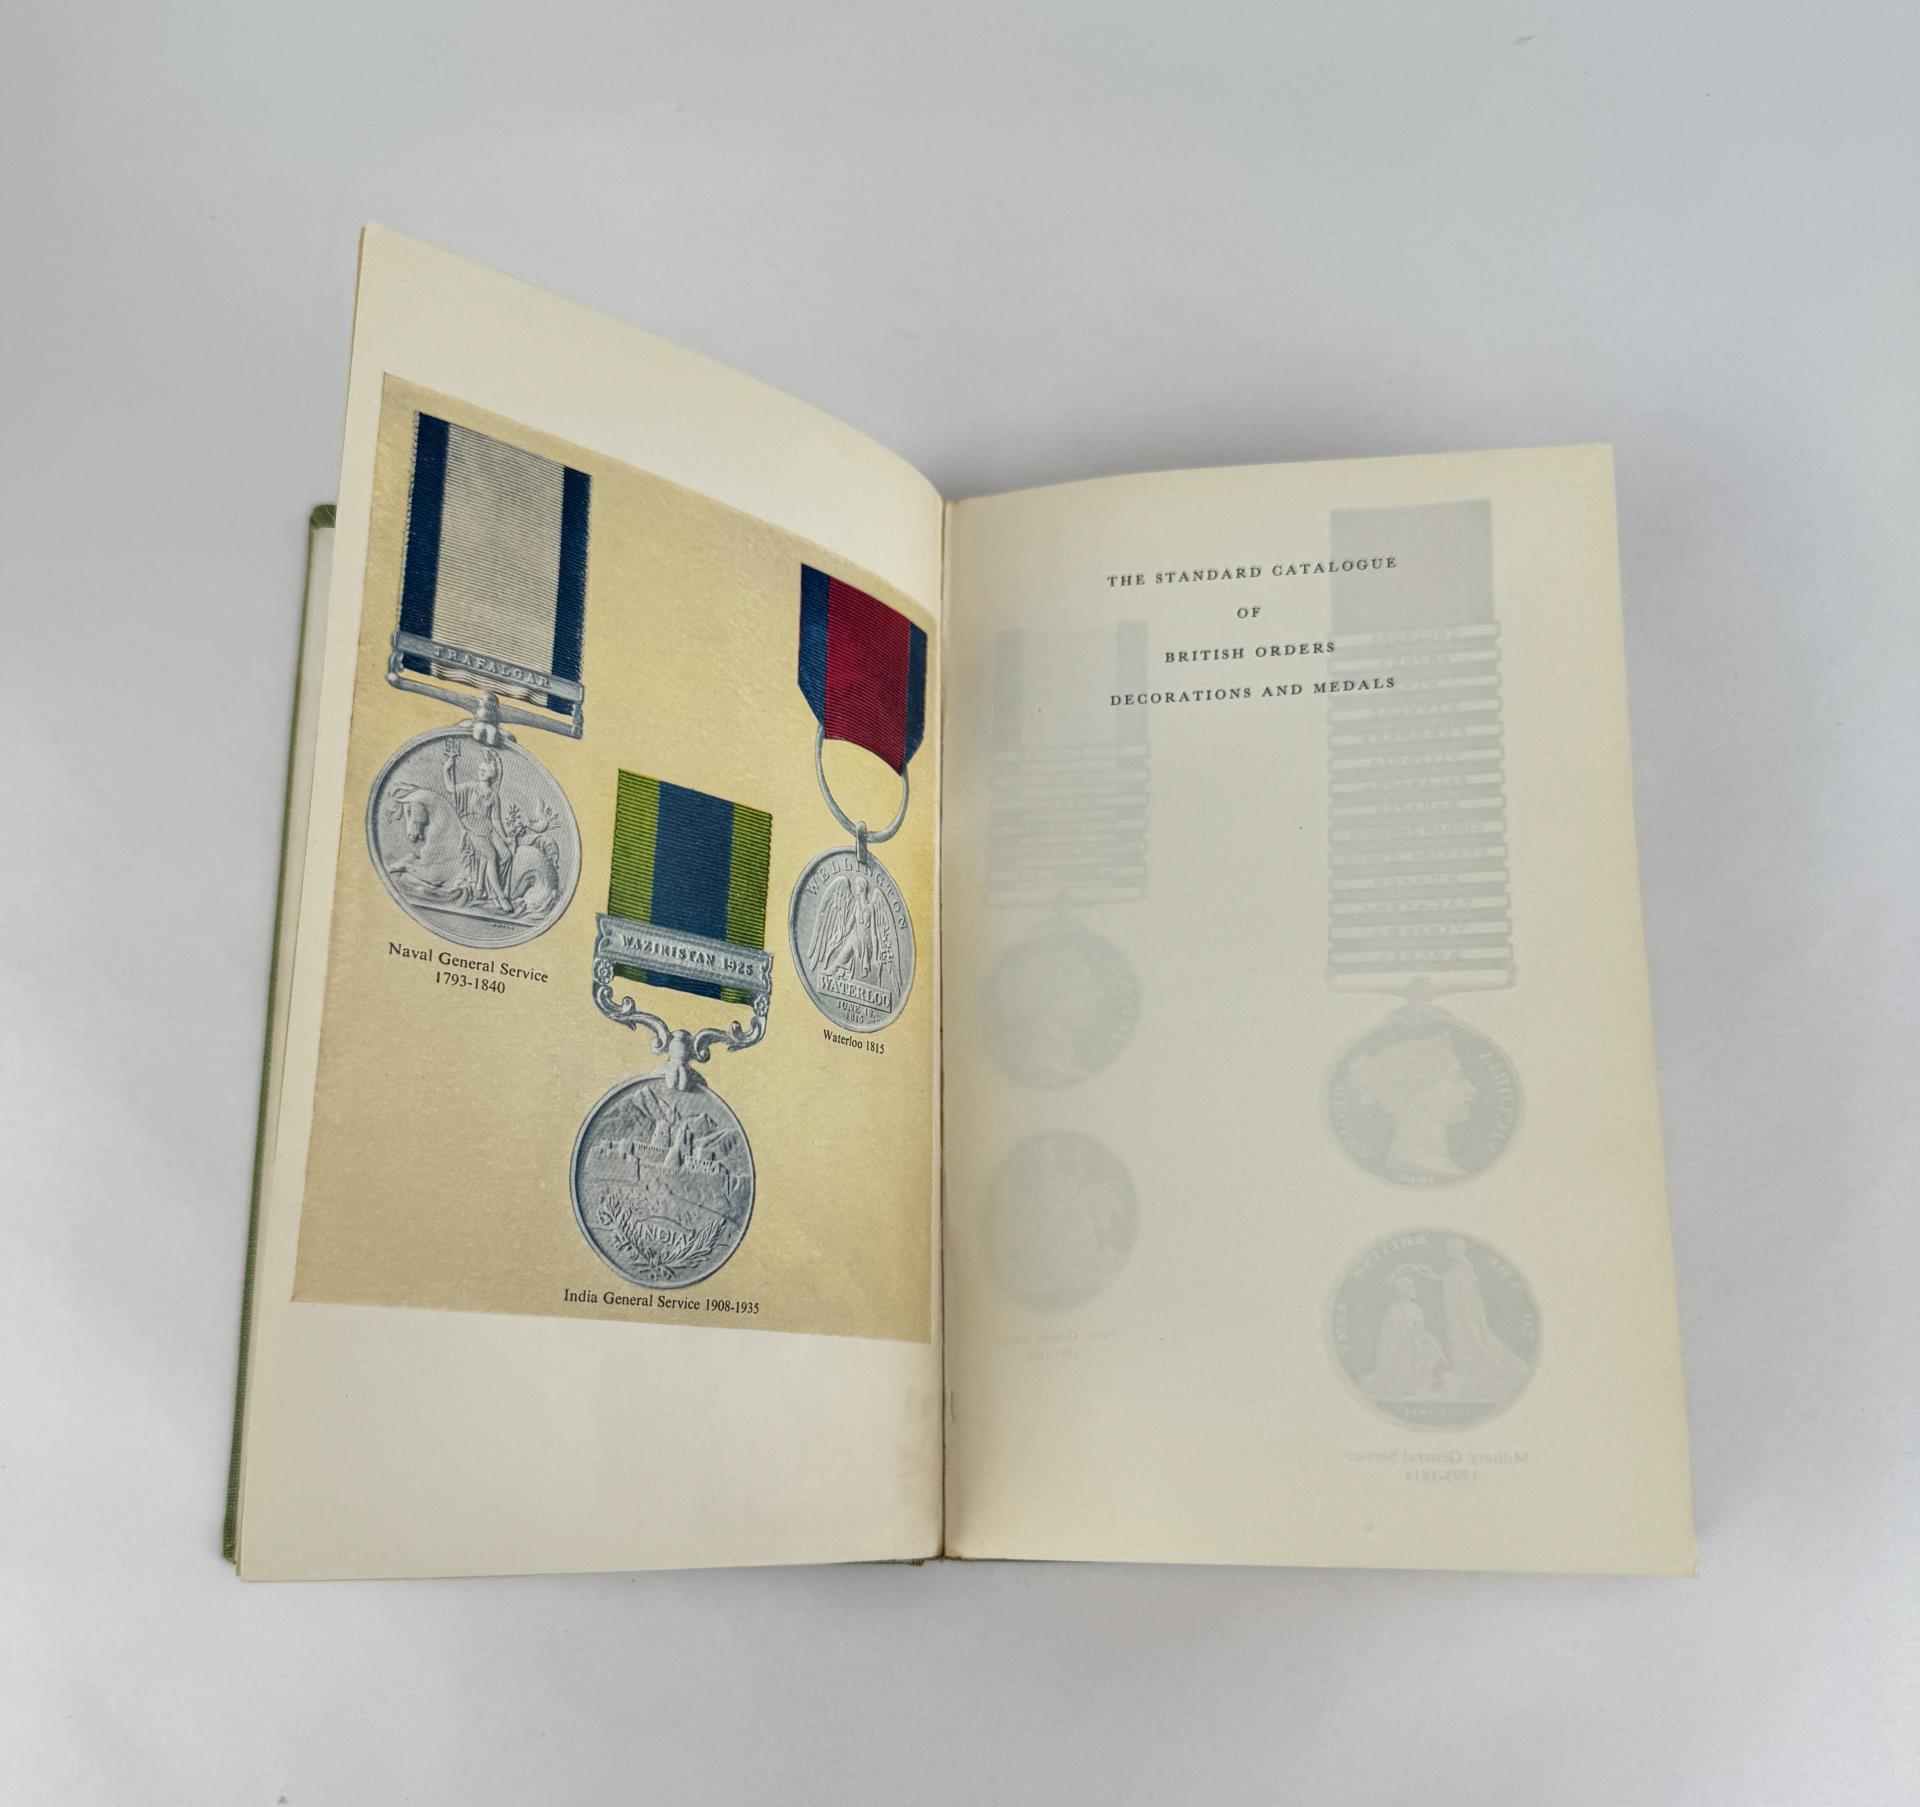 British Orders Decorations And Medals 1969